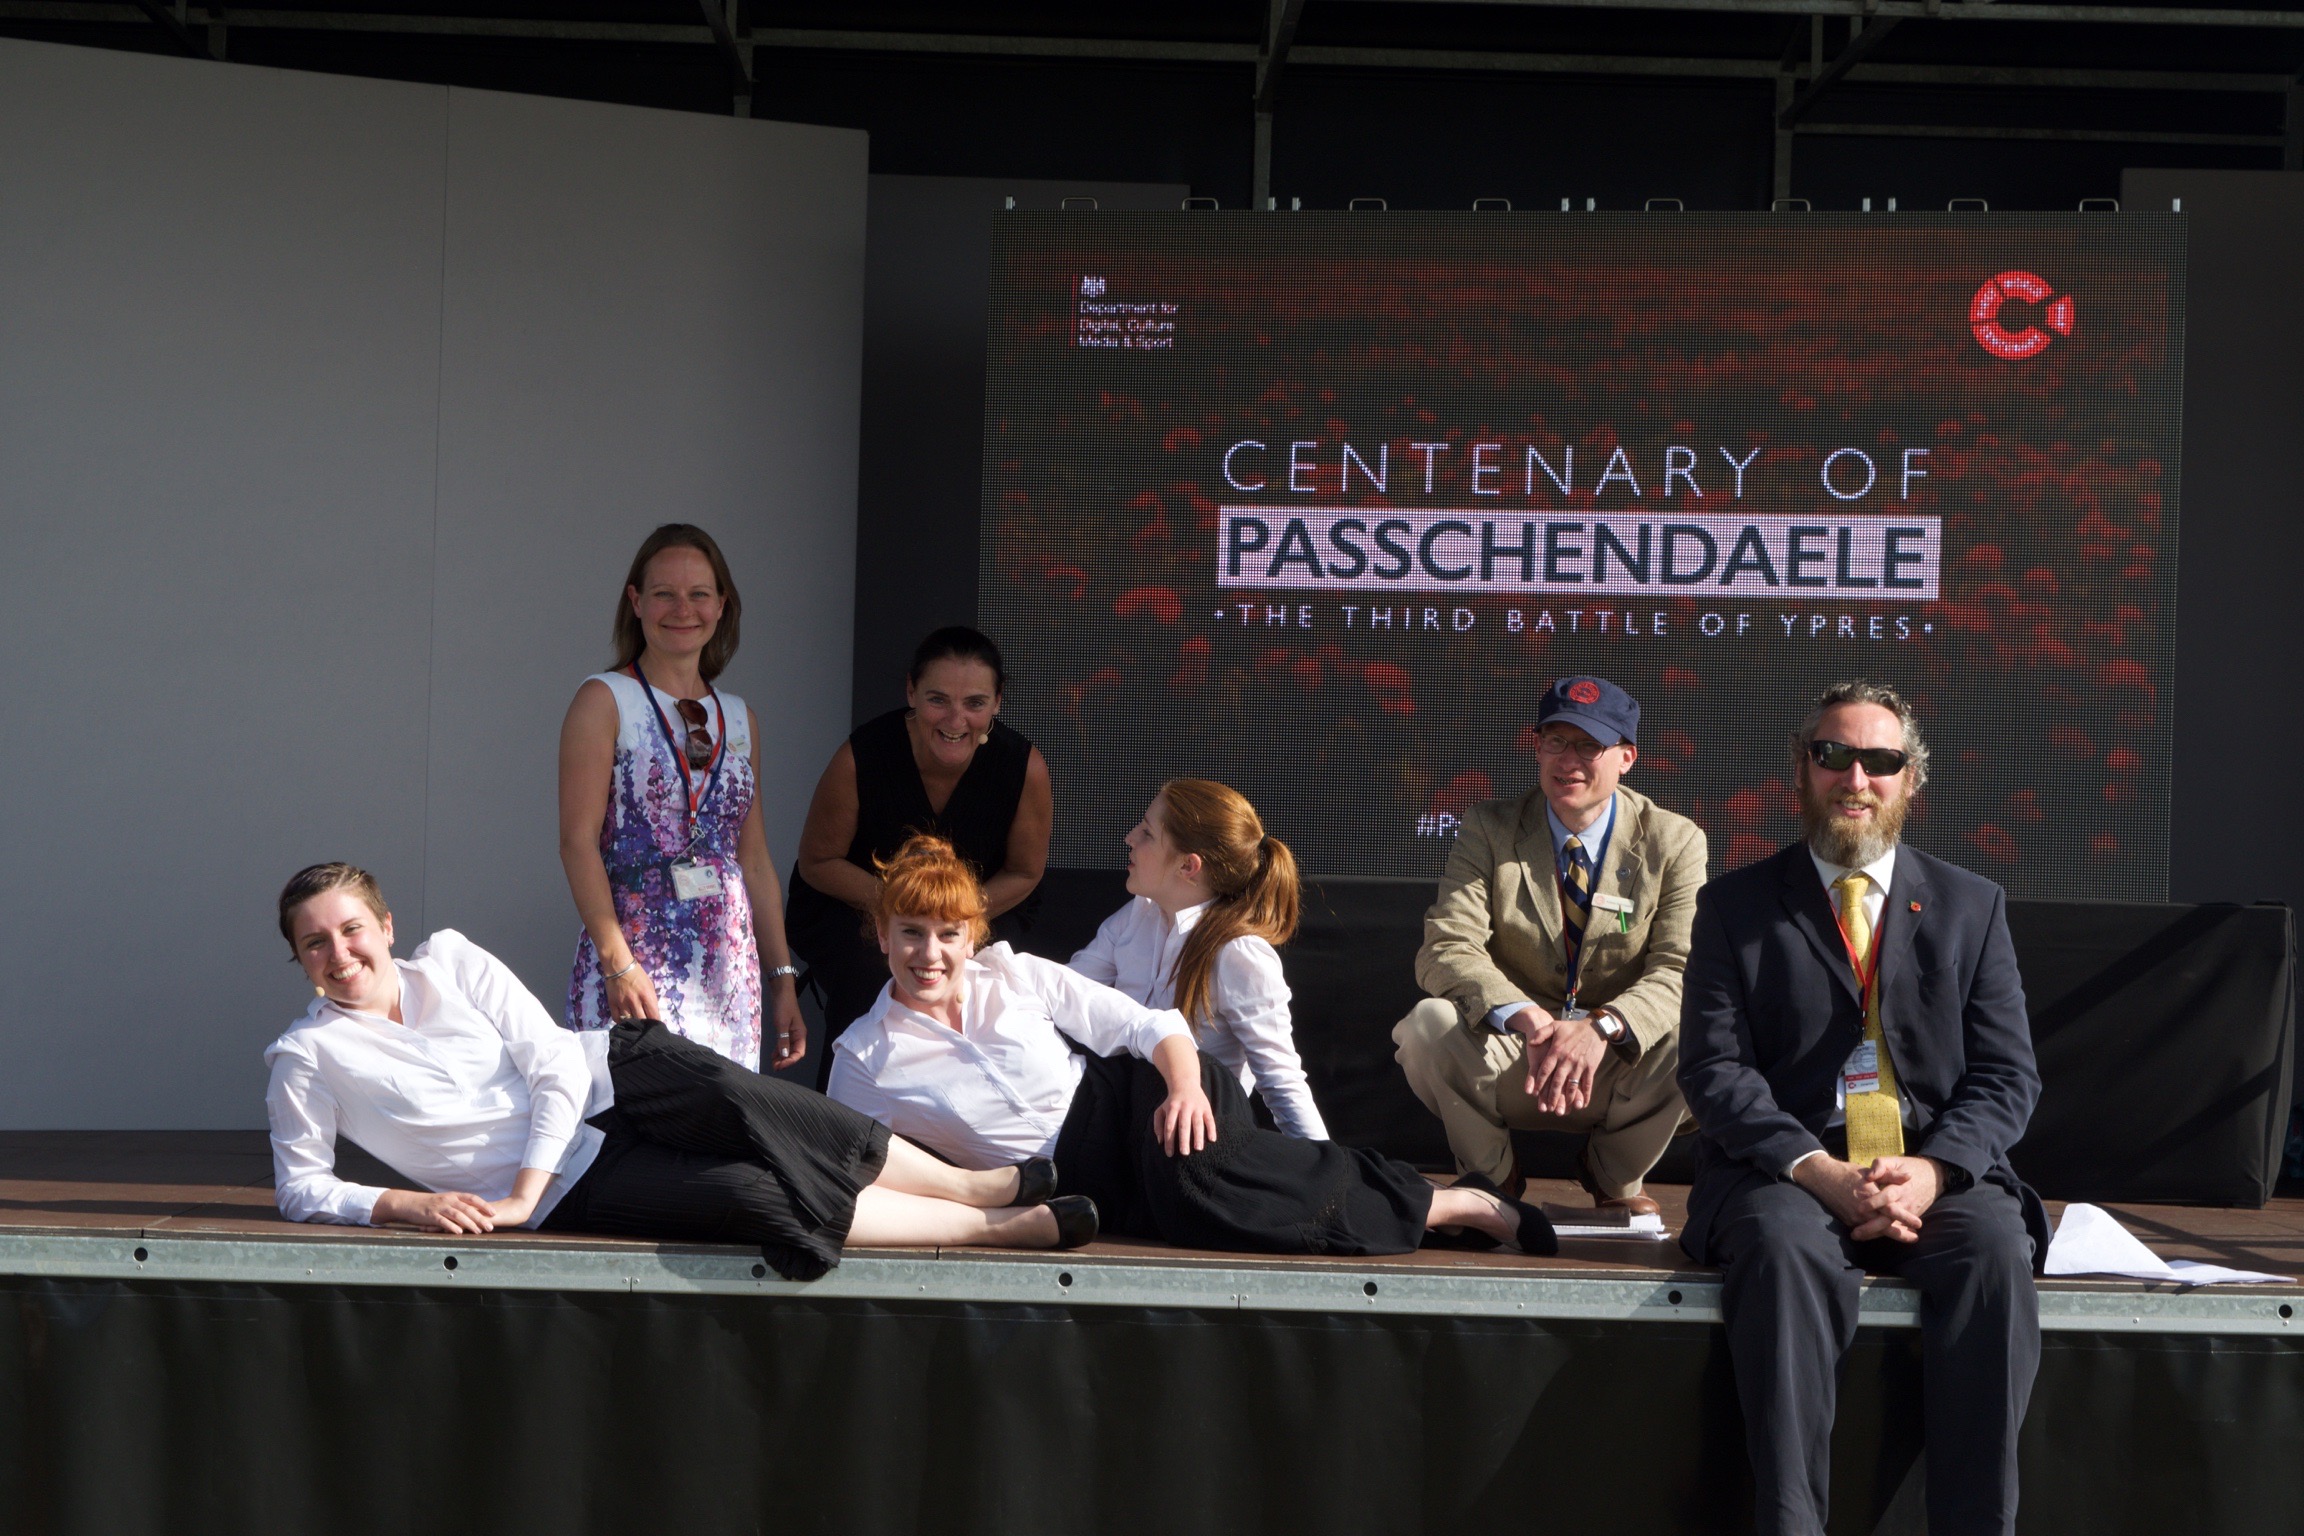 Seven members of the Gateways team posing on the outdoor stage in Belgium in front of a screen reading 'Centenary of Passchendaele, The Third Battle of Ypres'